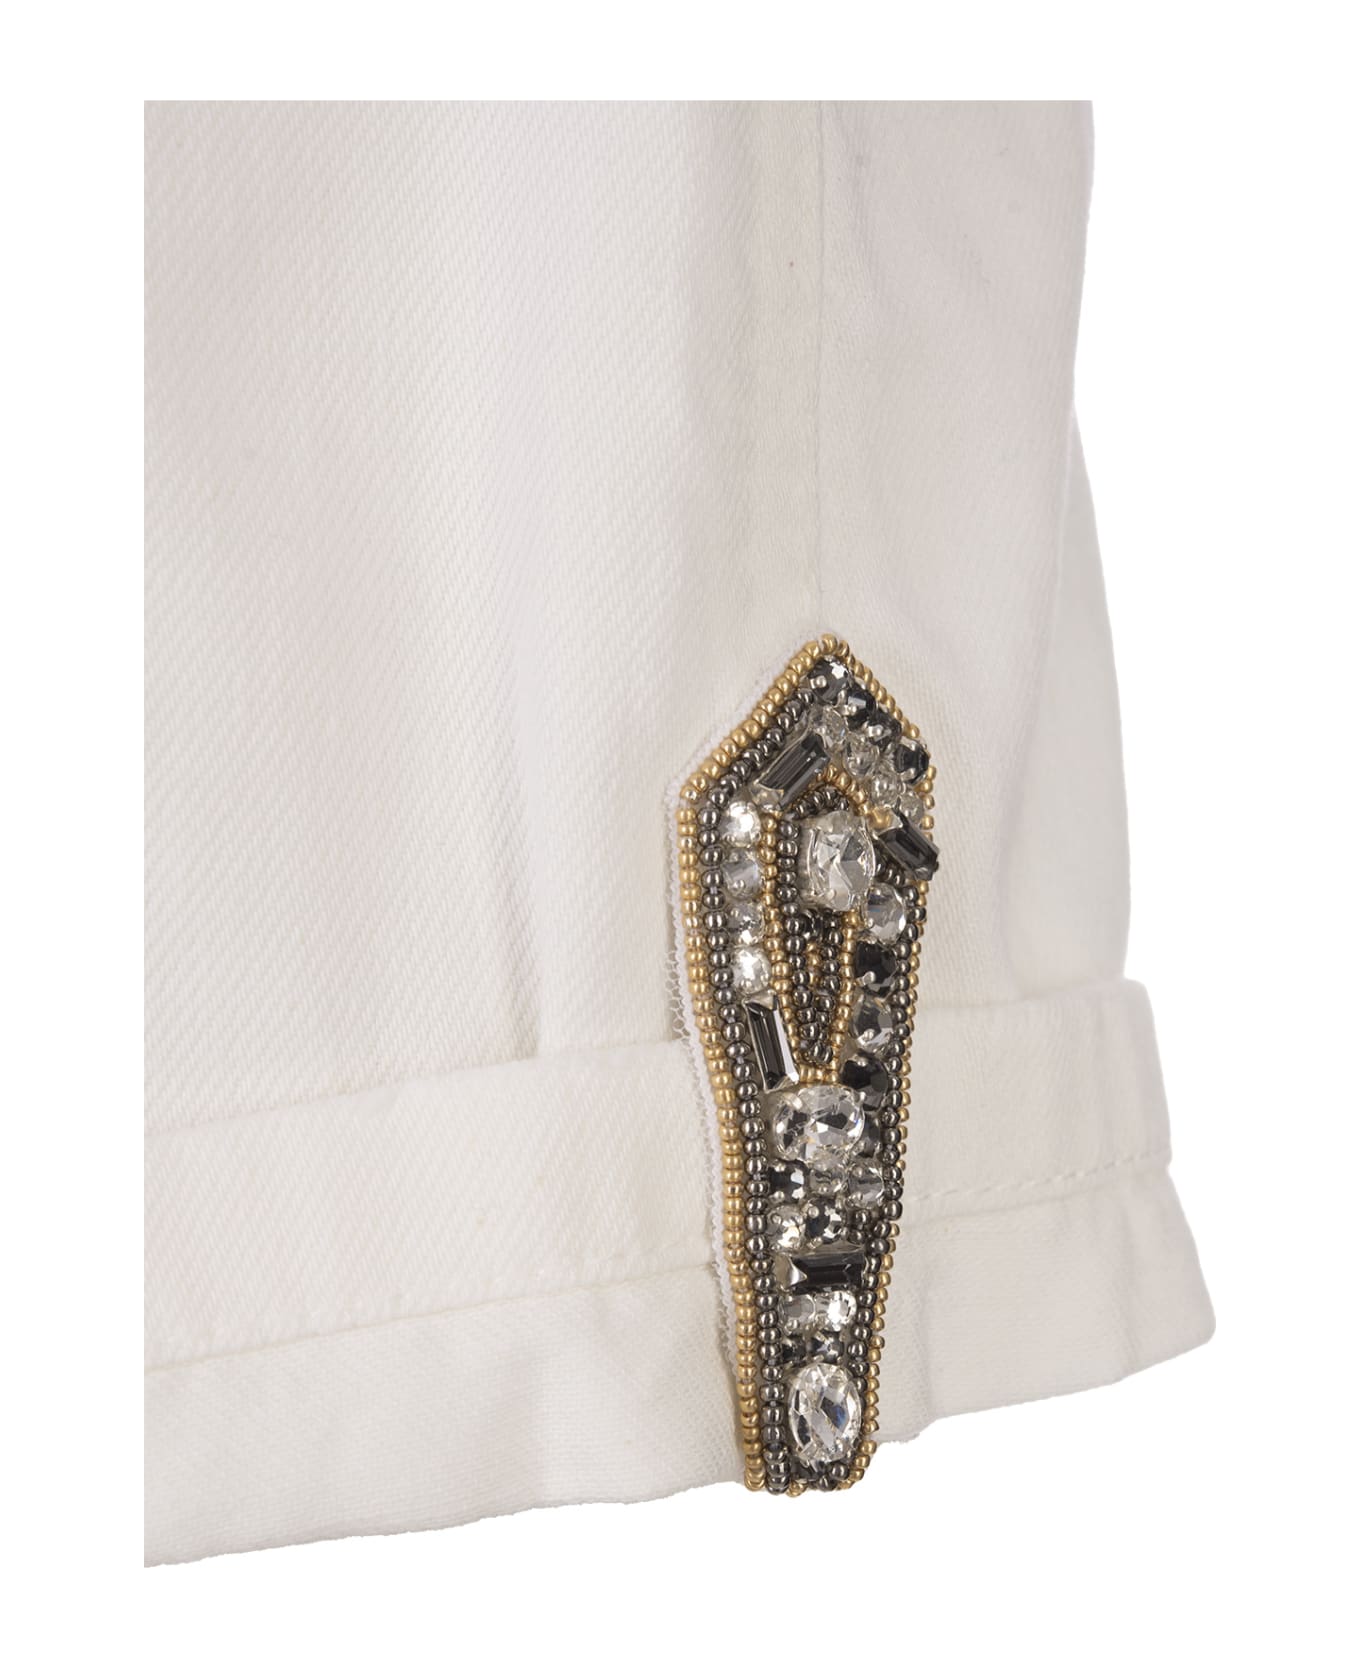 Ermanno Scervino White Shorts With Jewel Detailing - White